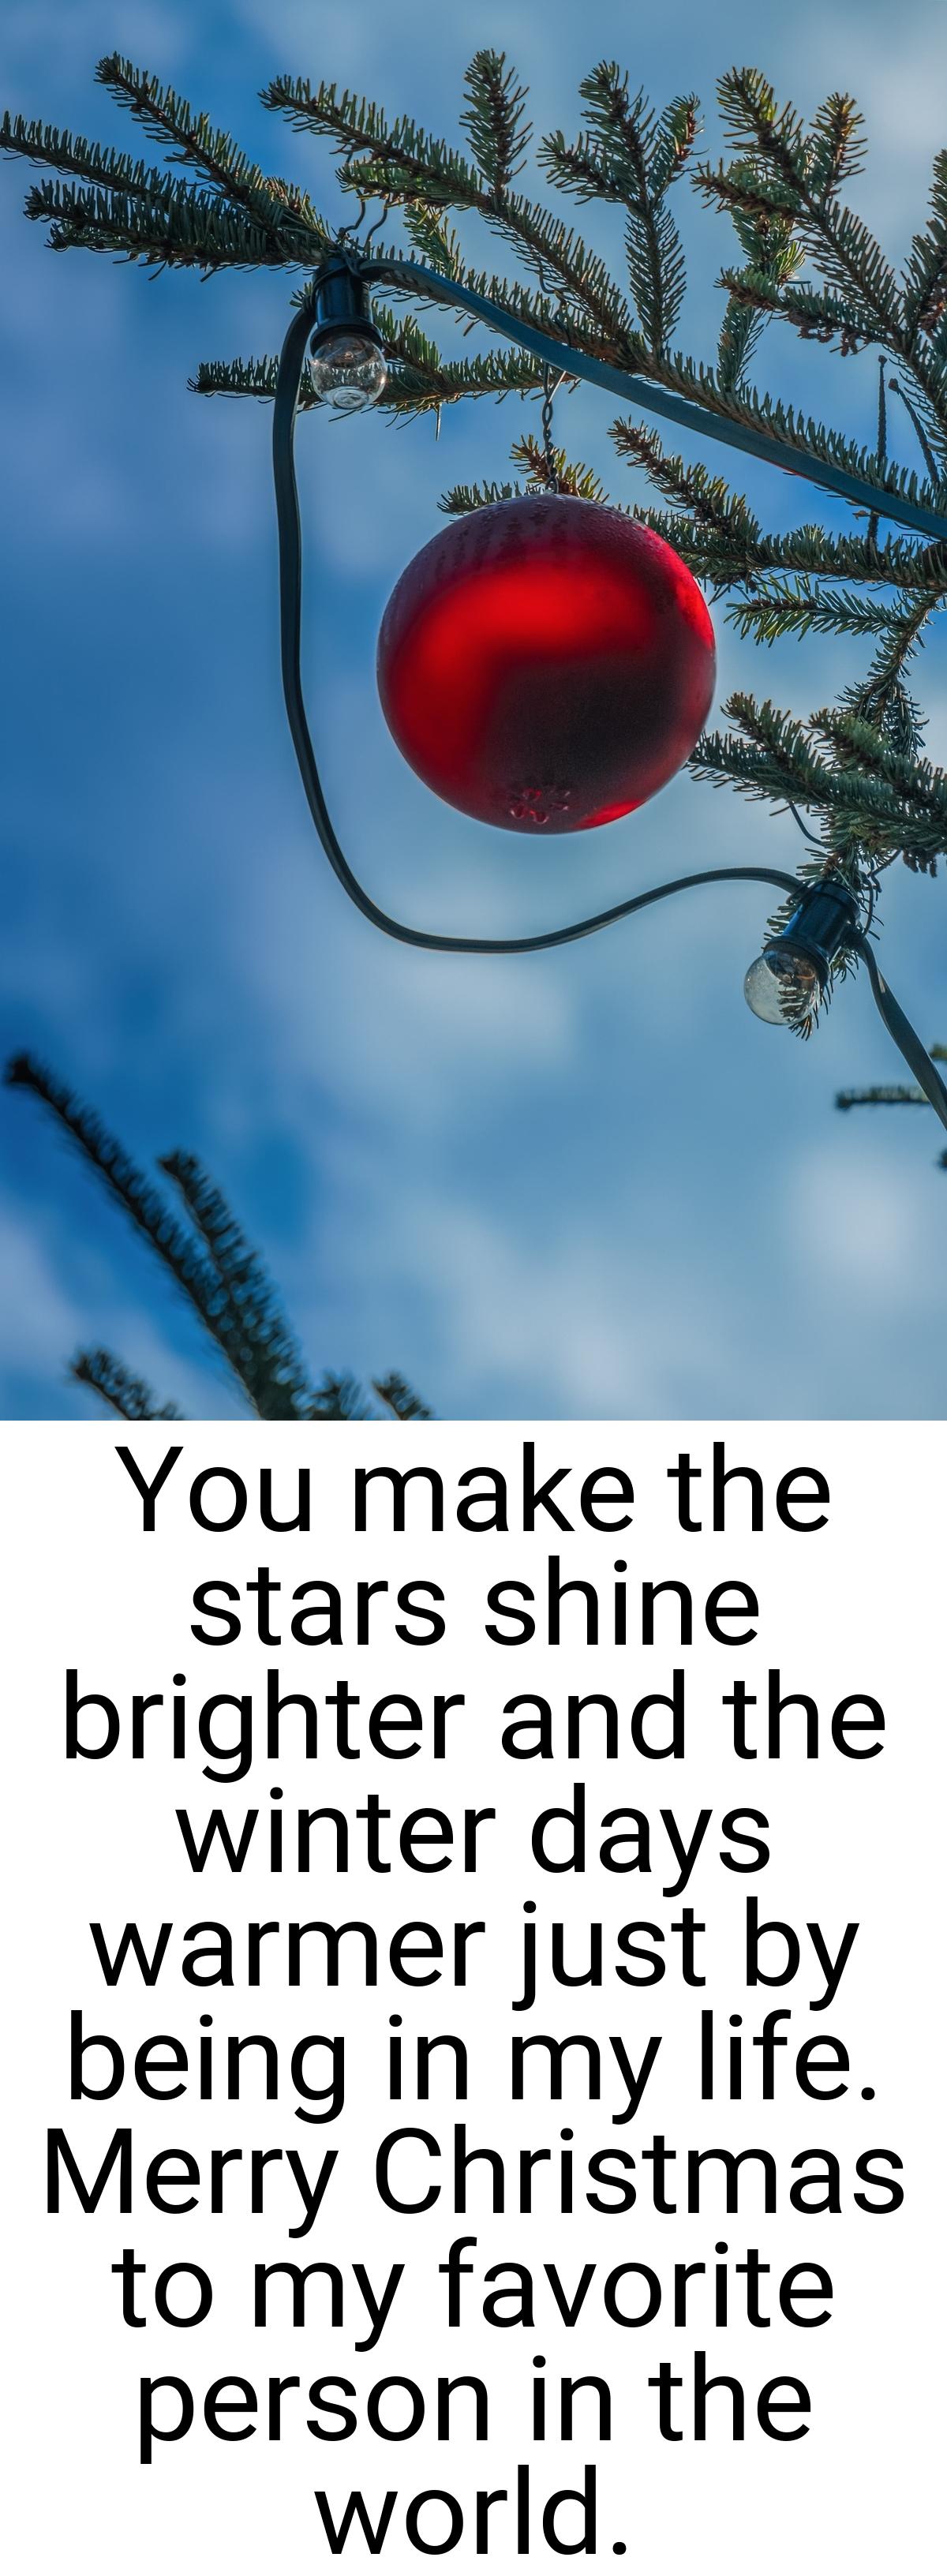 You make the stars shine brighter and the winter days